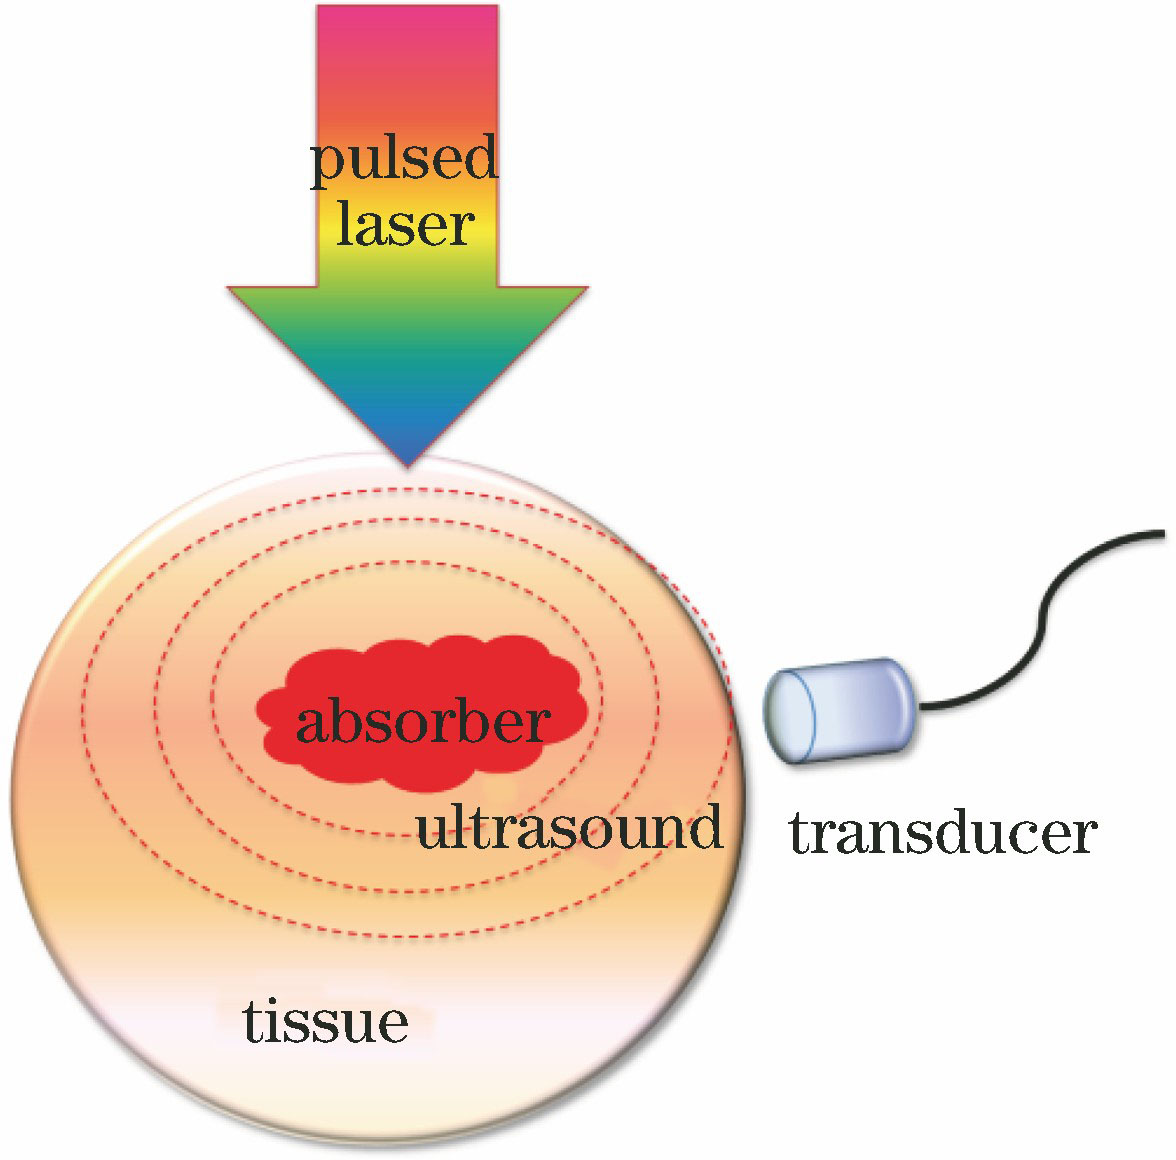 Principle of photoacoustic imaging